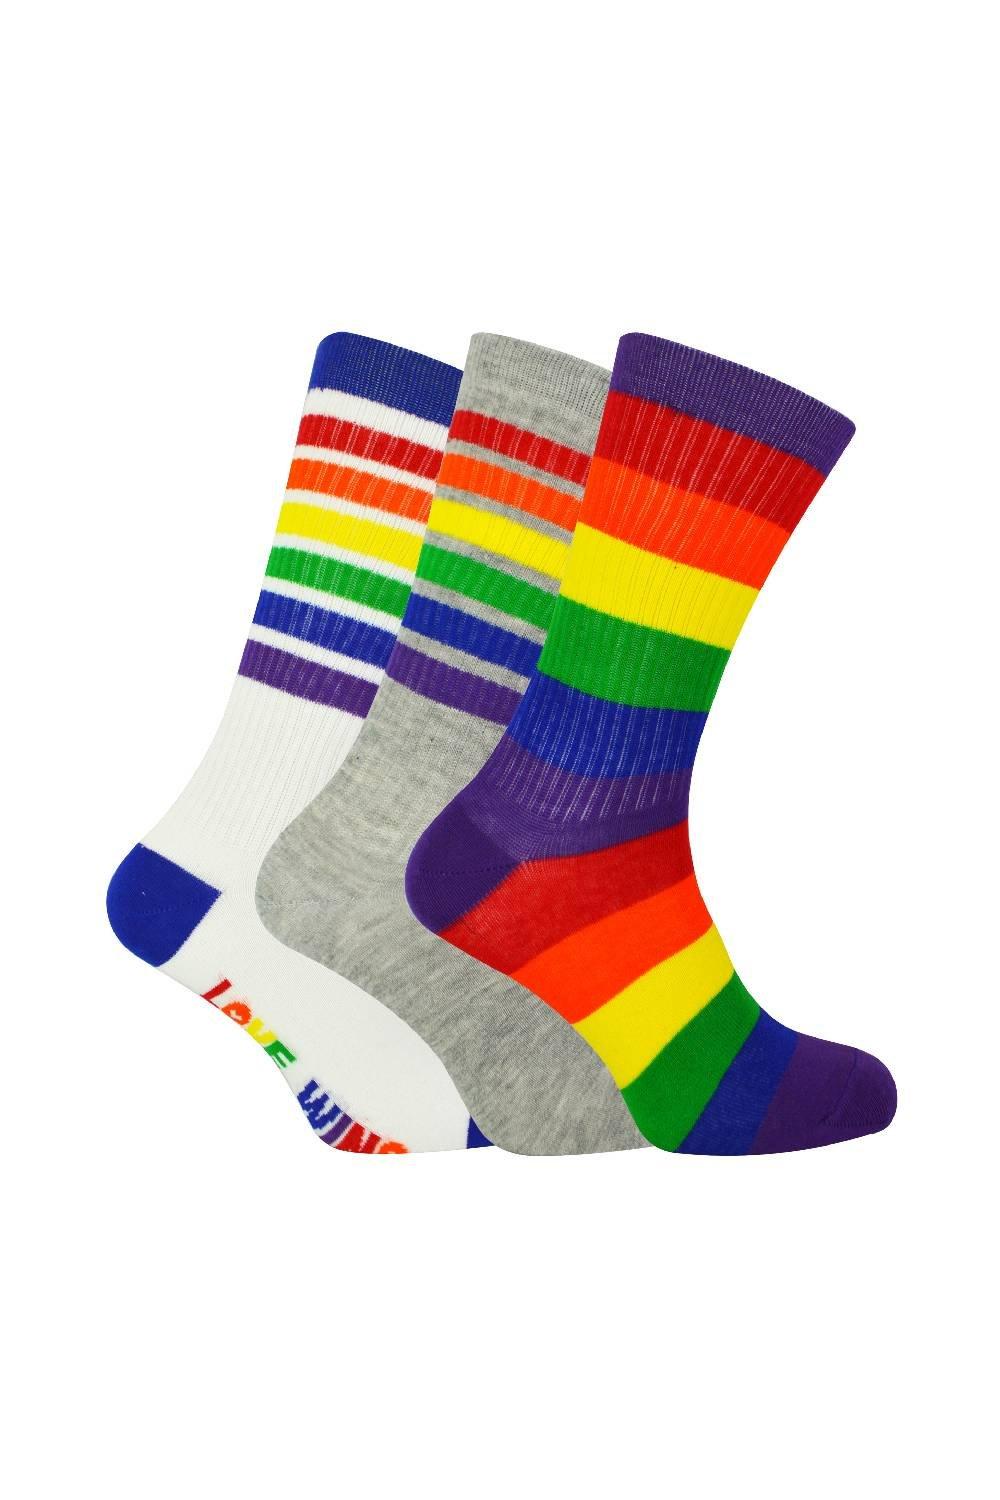 3 Pairs Rainbow Soft Cotton Novelty Socks in a Gift Box